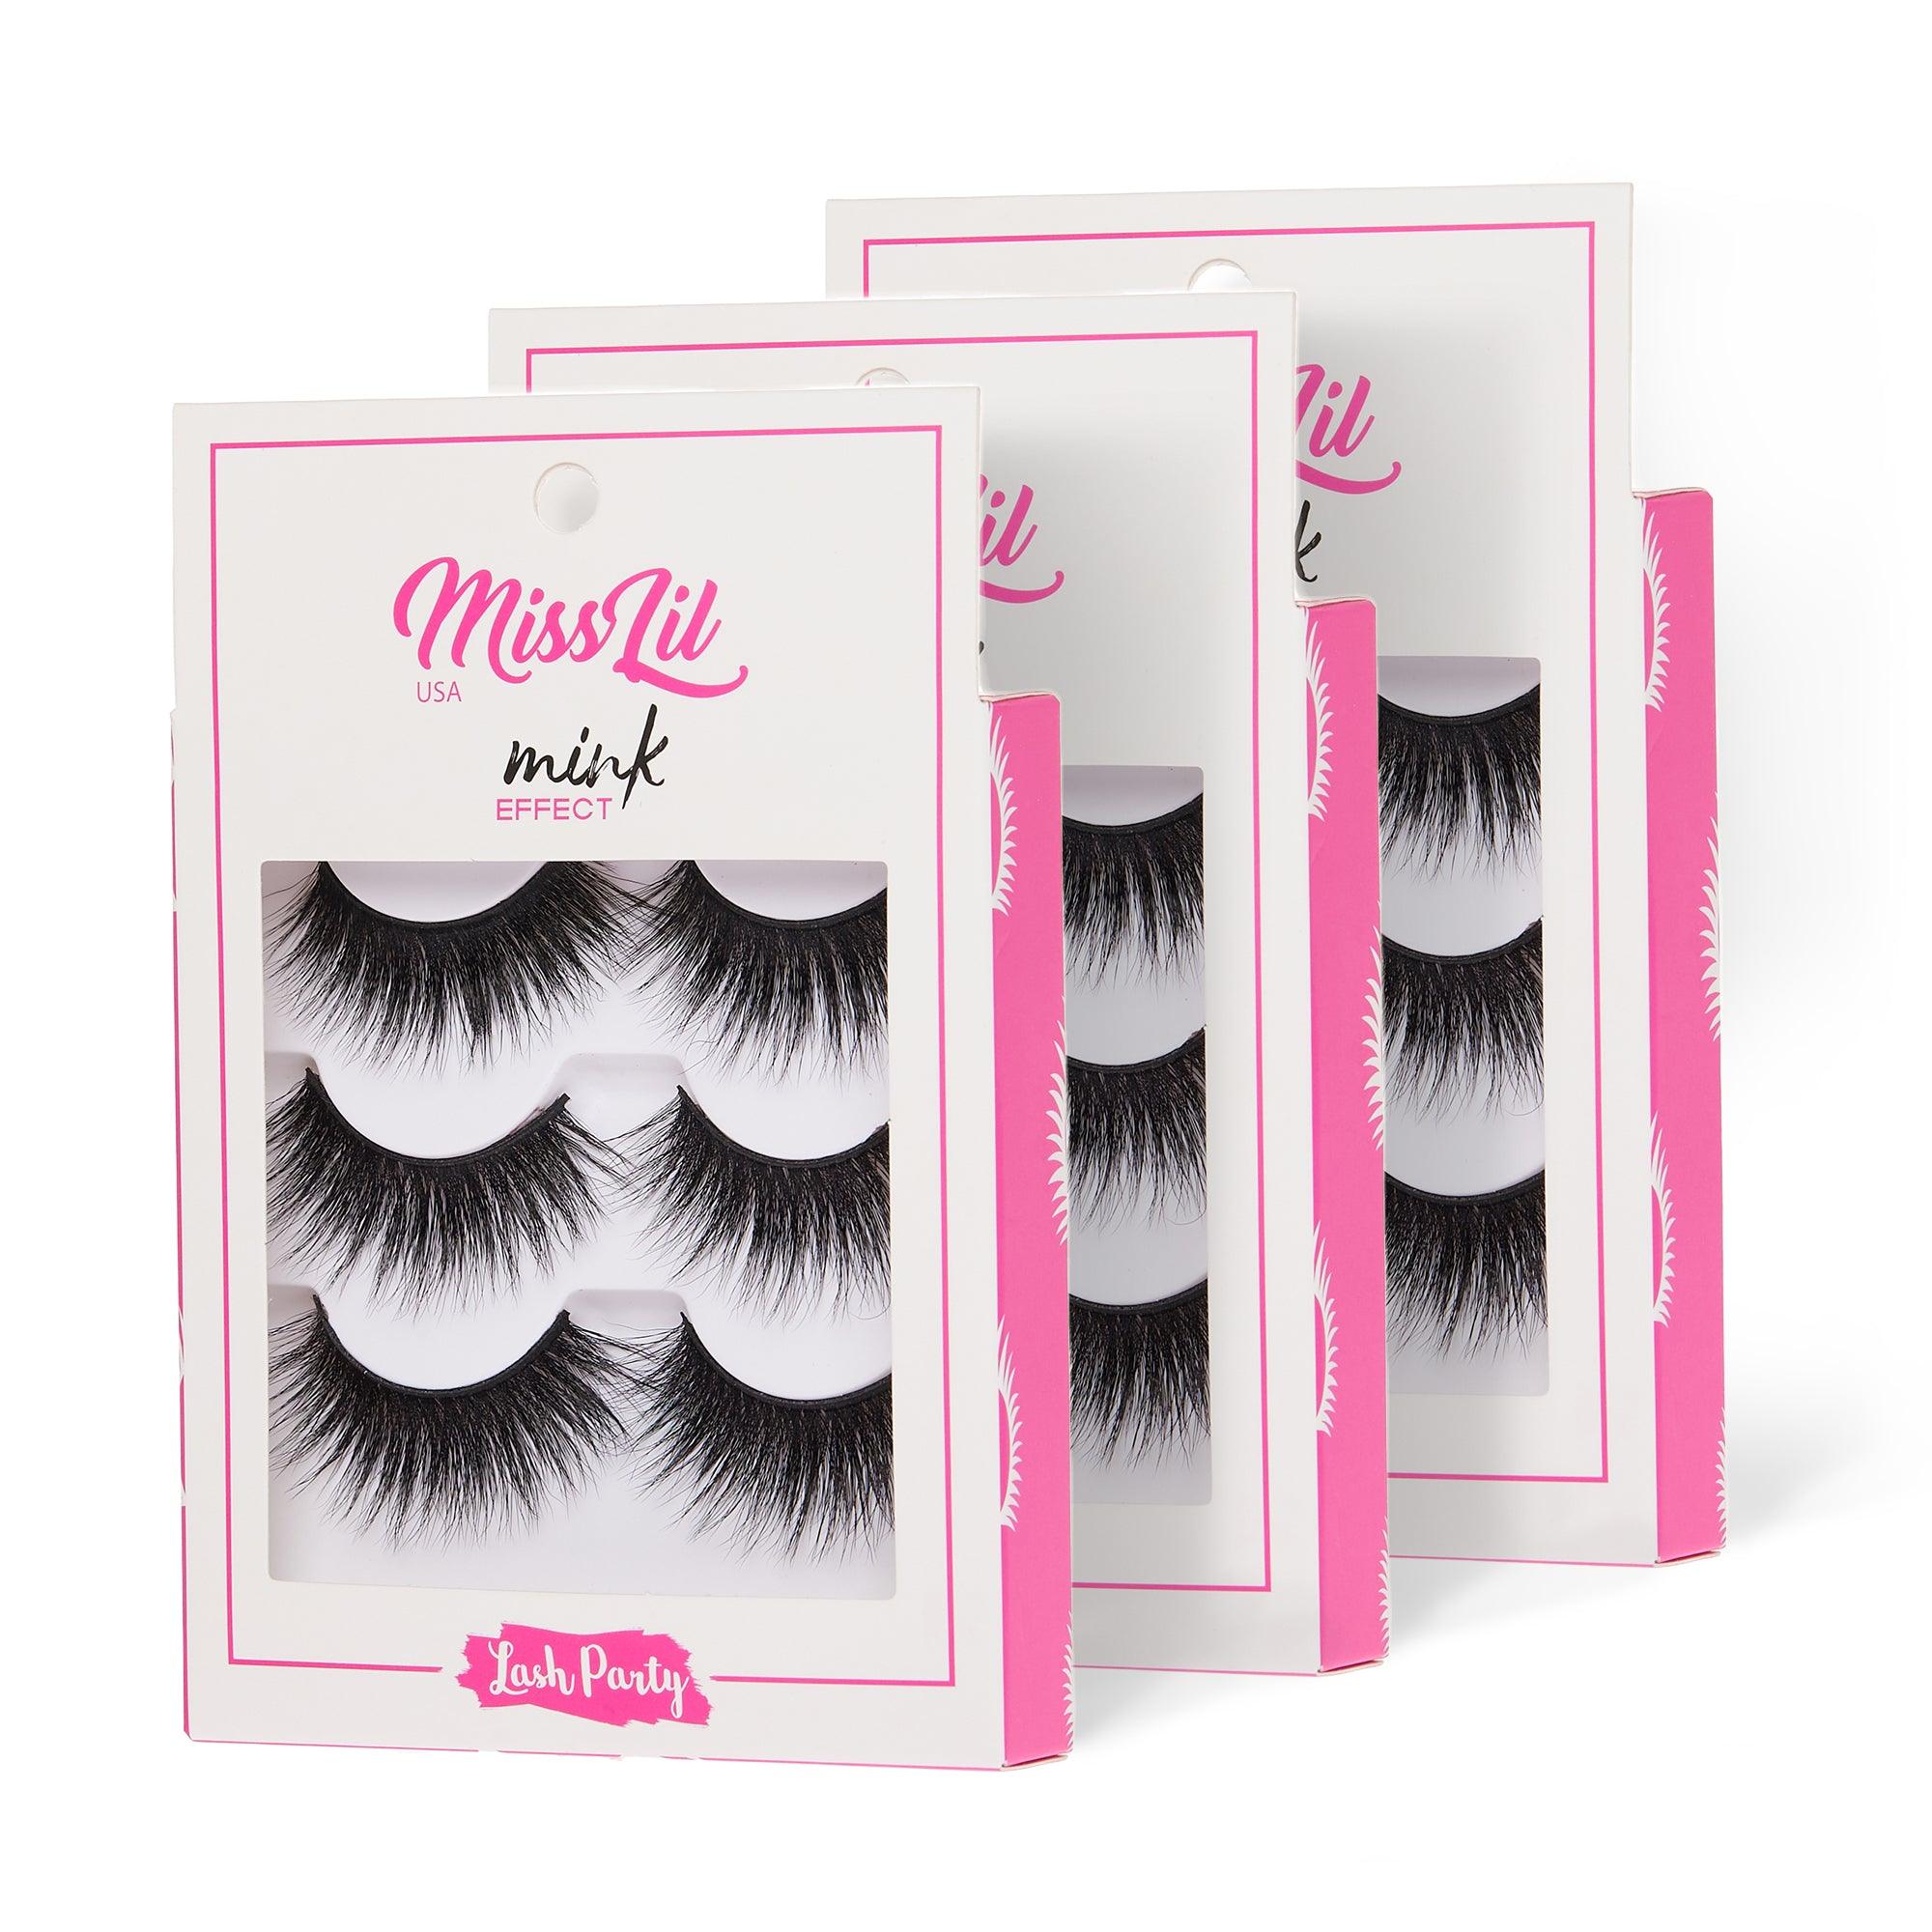 3-Pair Eyelashes - Lash Party Collection #4 ( Pack of 12) - Miss Lil USA Wholesale